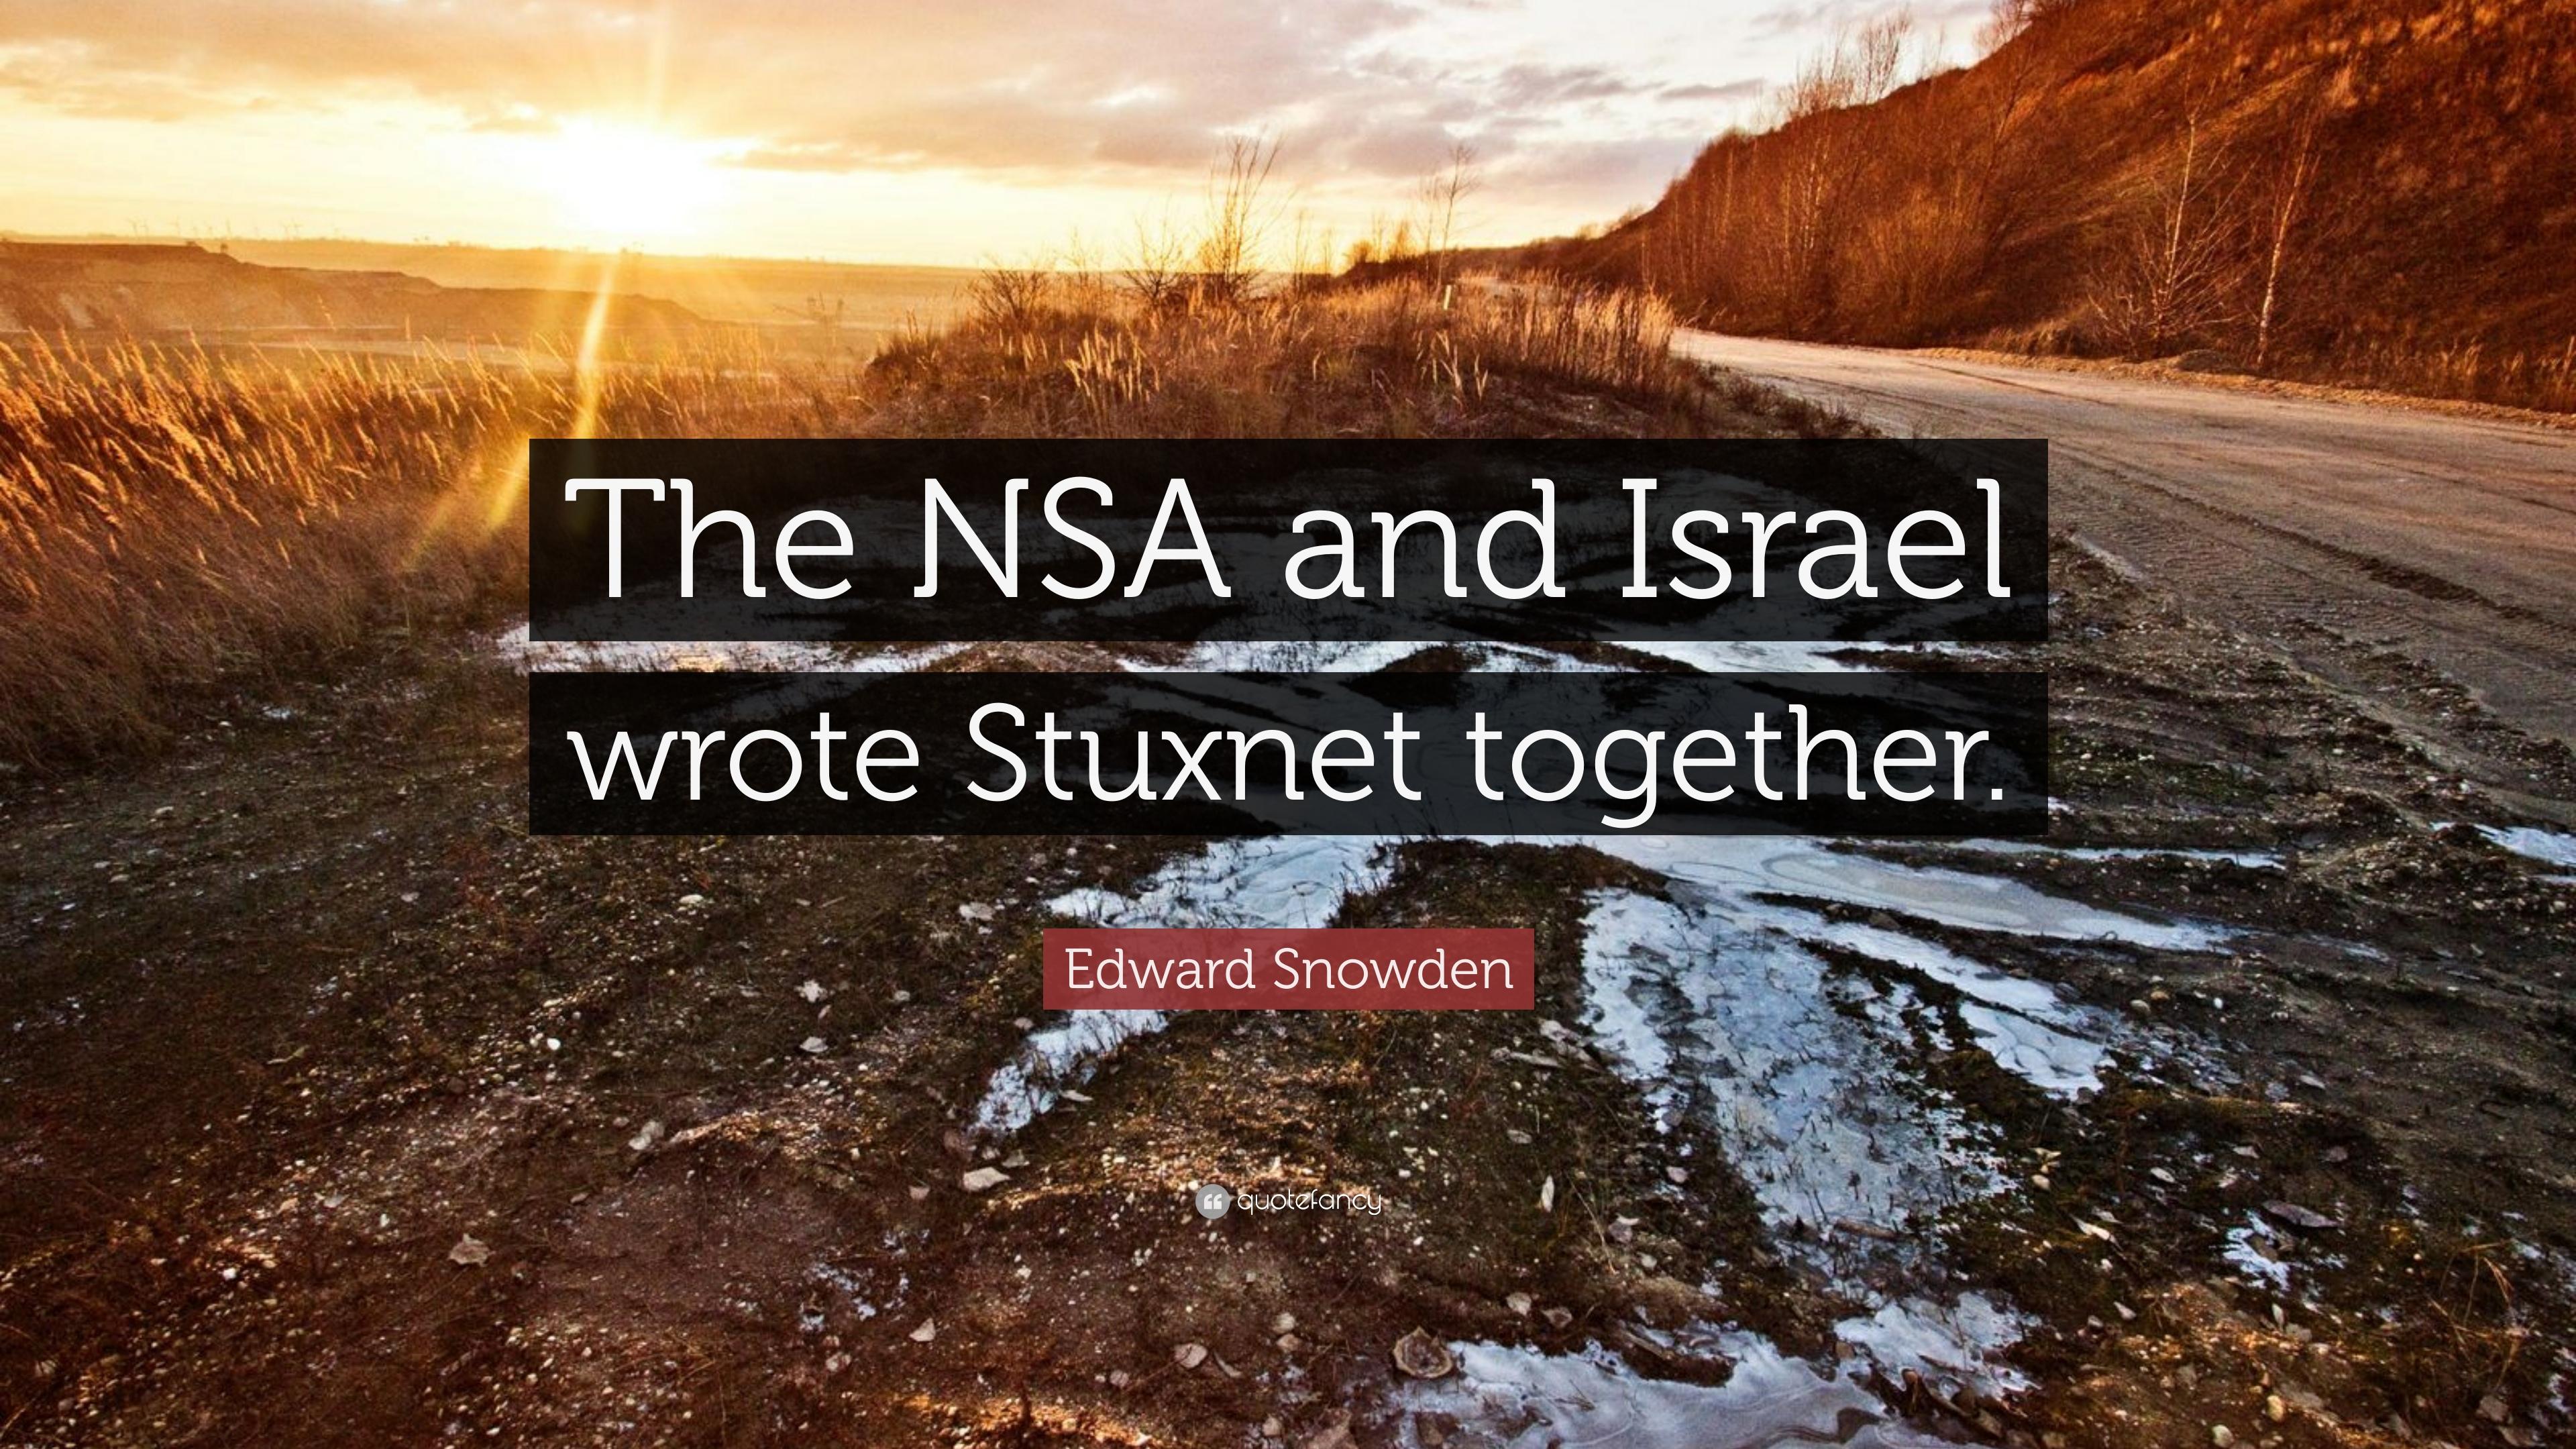 Edward Snowden Quote: “The NSA and Israel wrote Stuxnet together